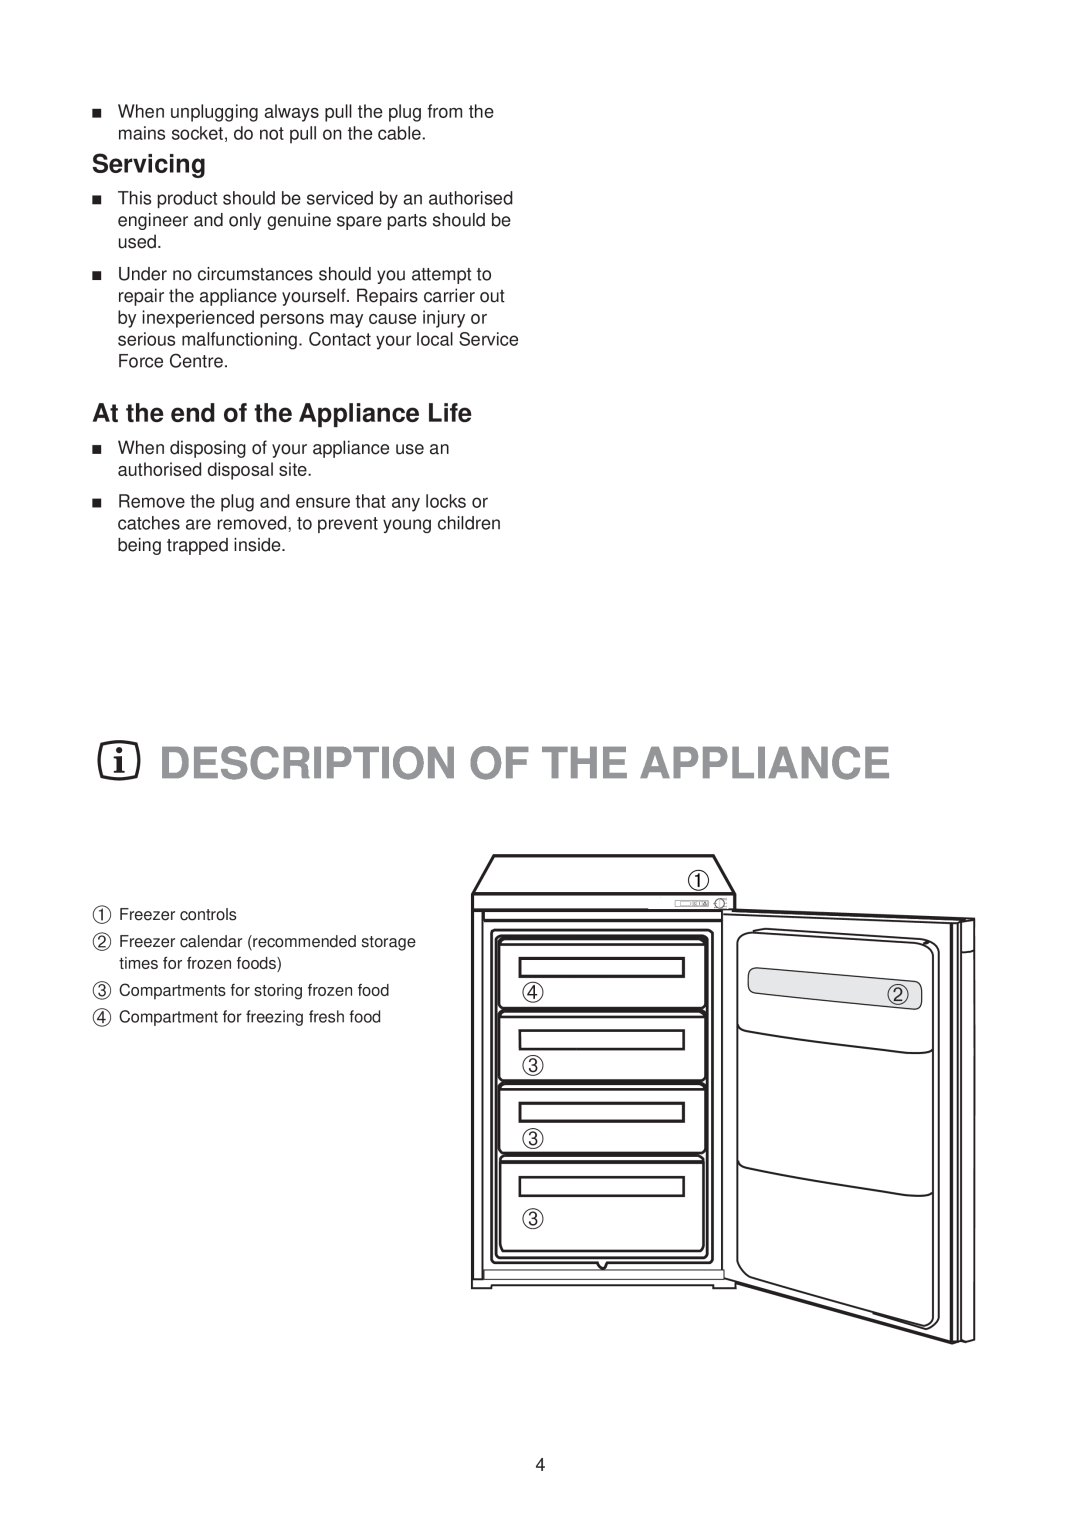 Zanussi ZVR 45 RN manual Description Of The Appliance, Servicing, At the end of the Appliance Life 